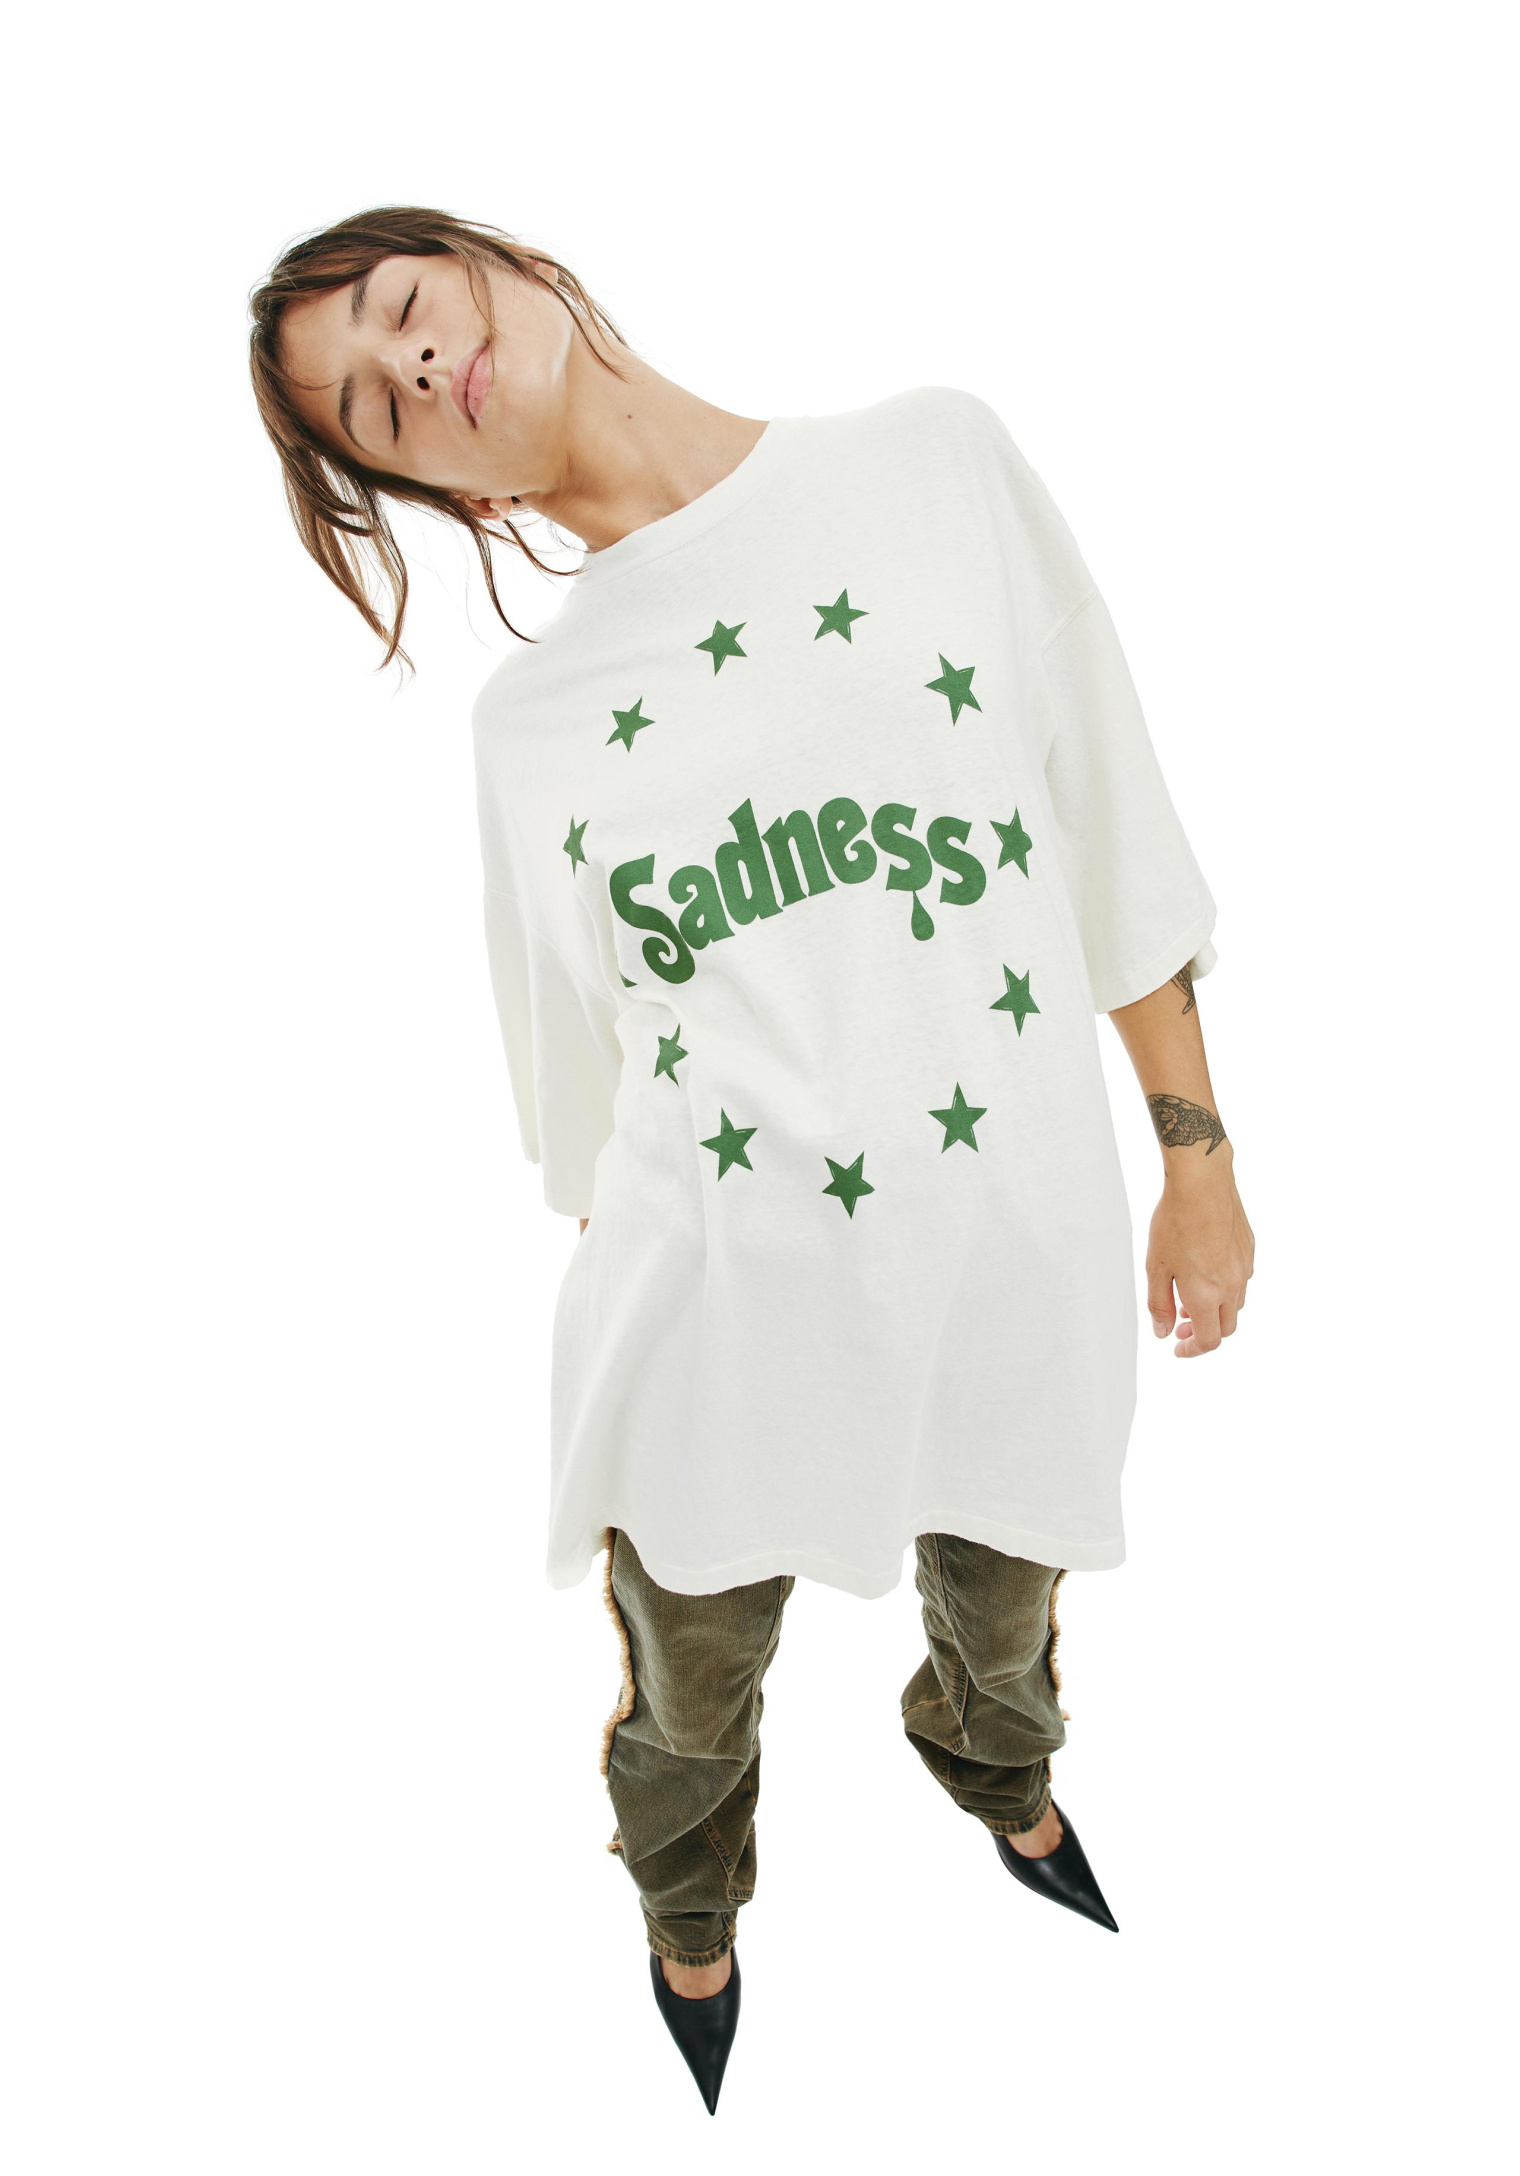 Undercover Sadness printed t-shirt